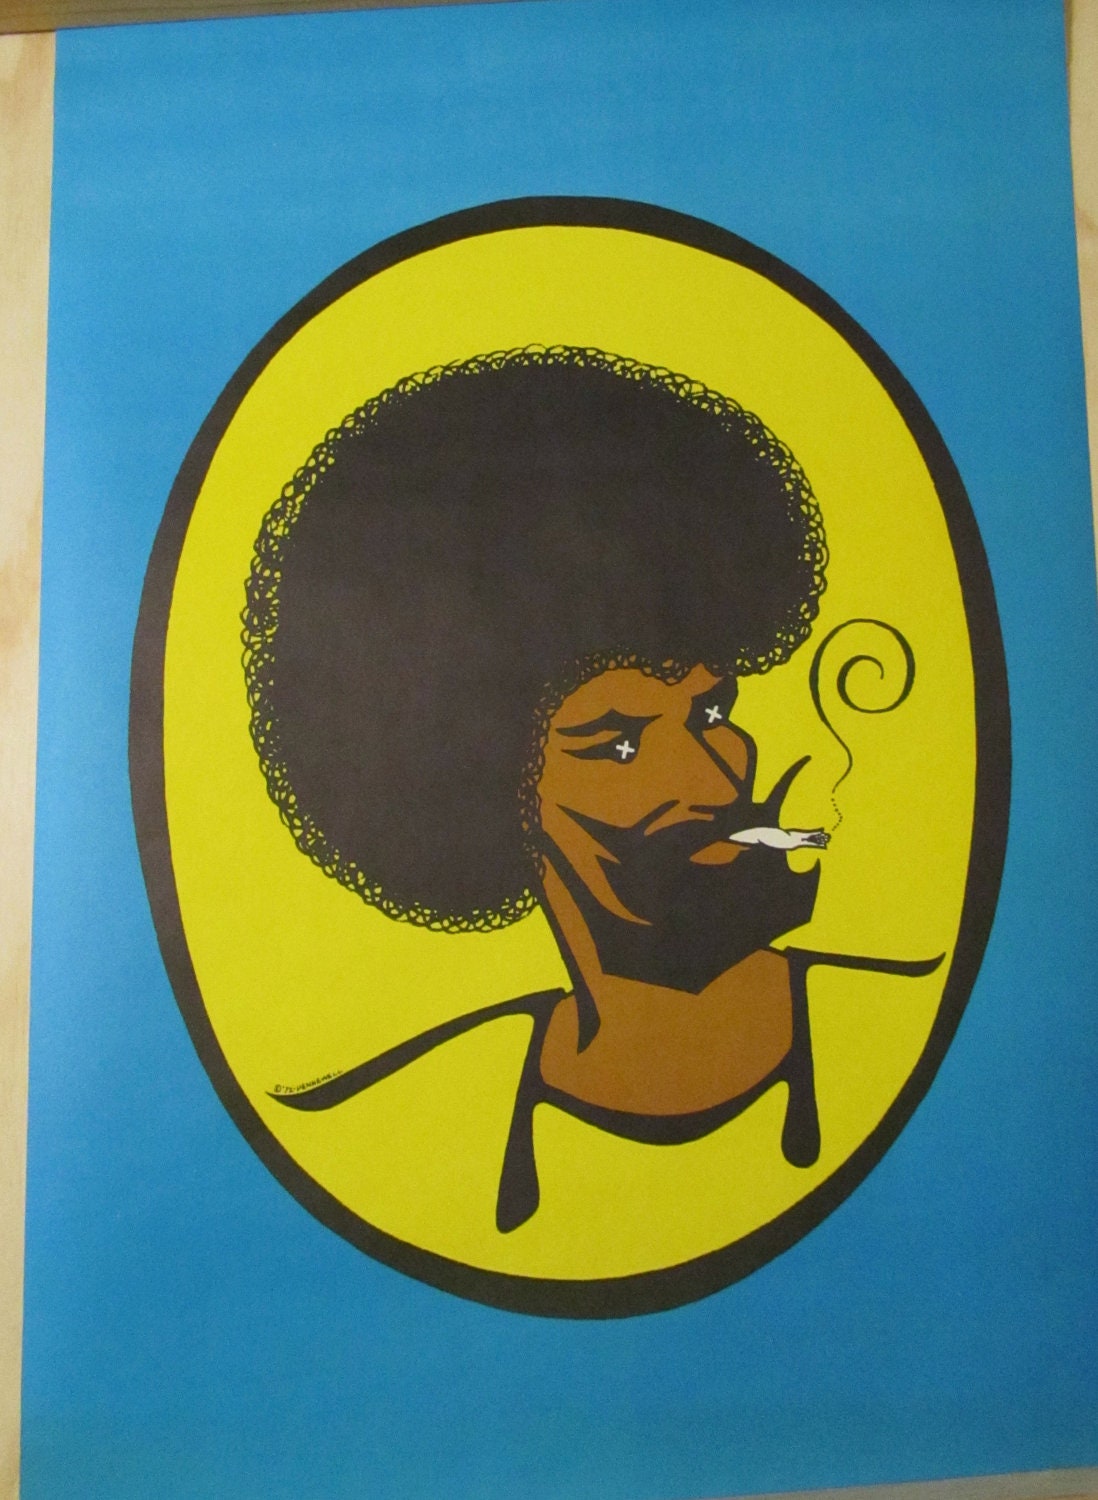 Items similar to Afro ZIG ZAG Man Poster, 1973 Vintage Collectible on Etsy